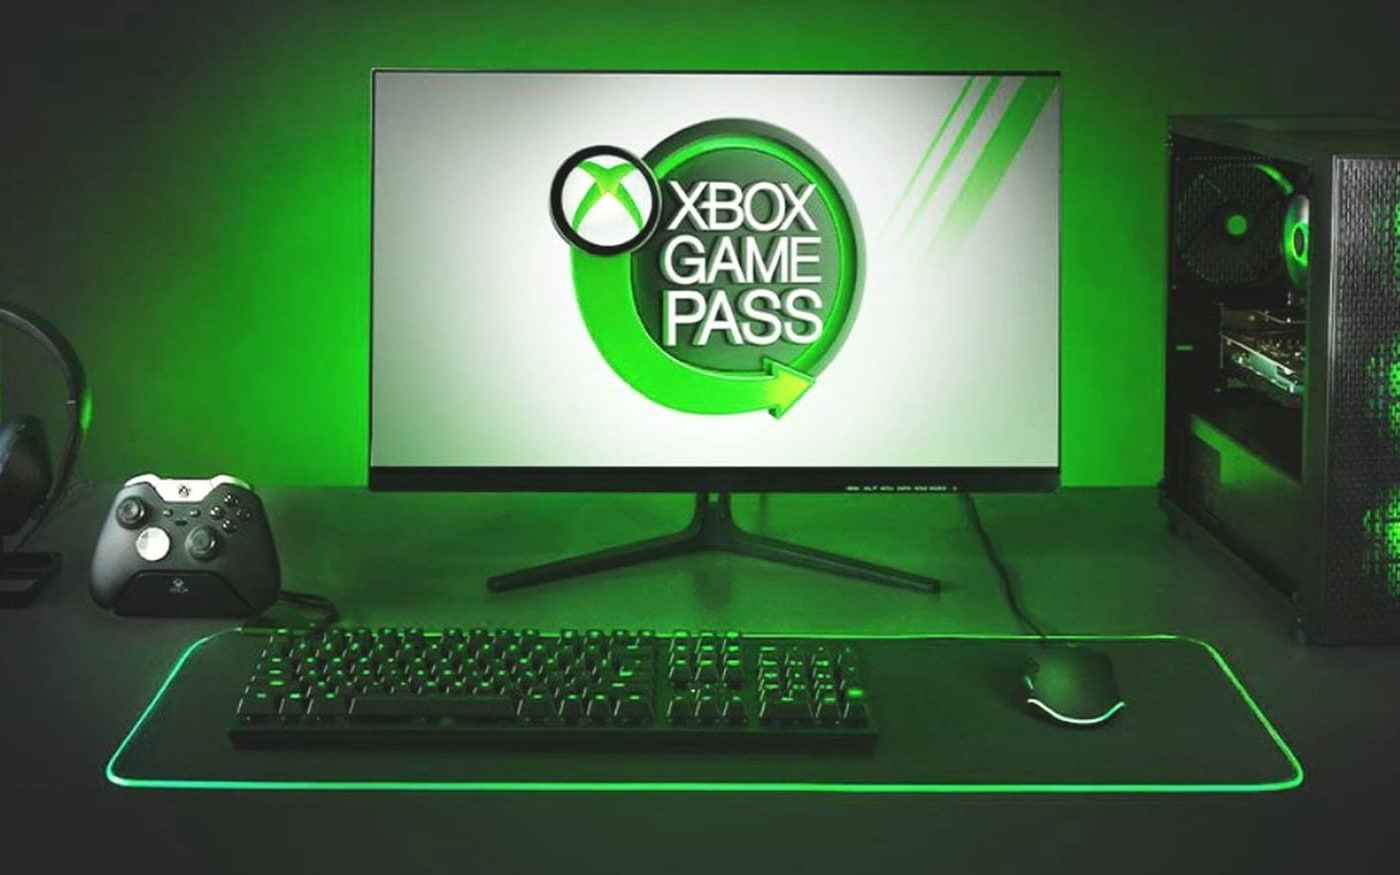 xbox game pass beta pc redeemed code not appearing